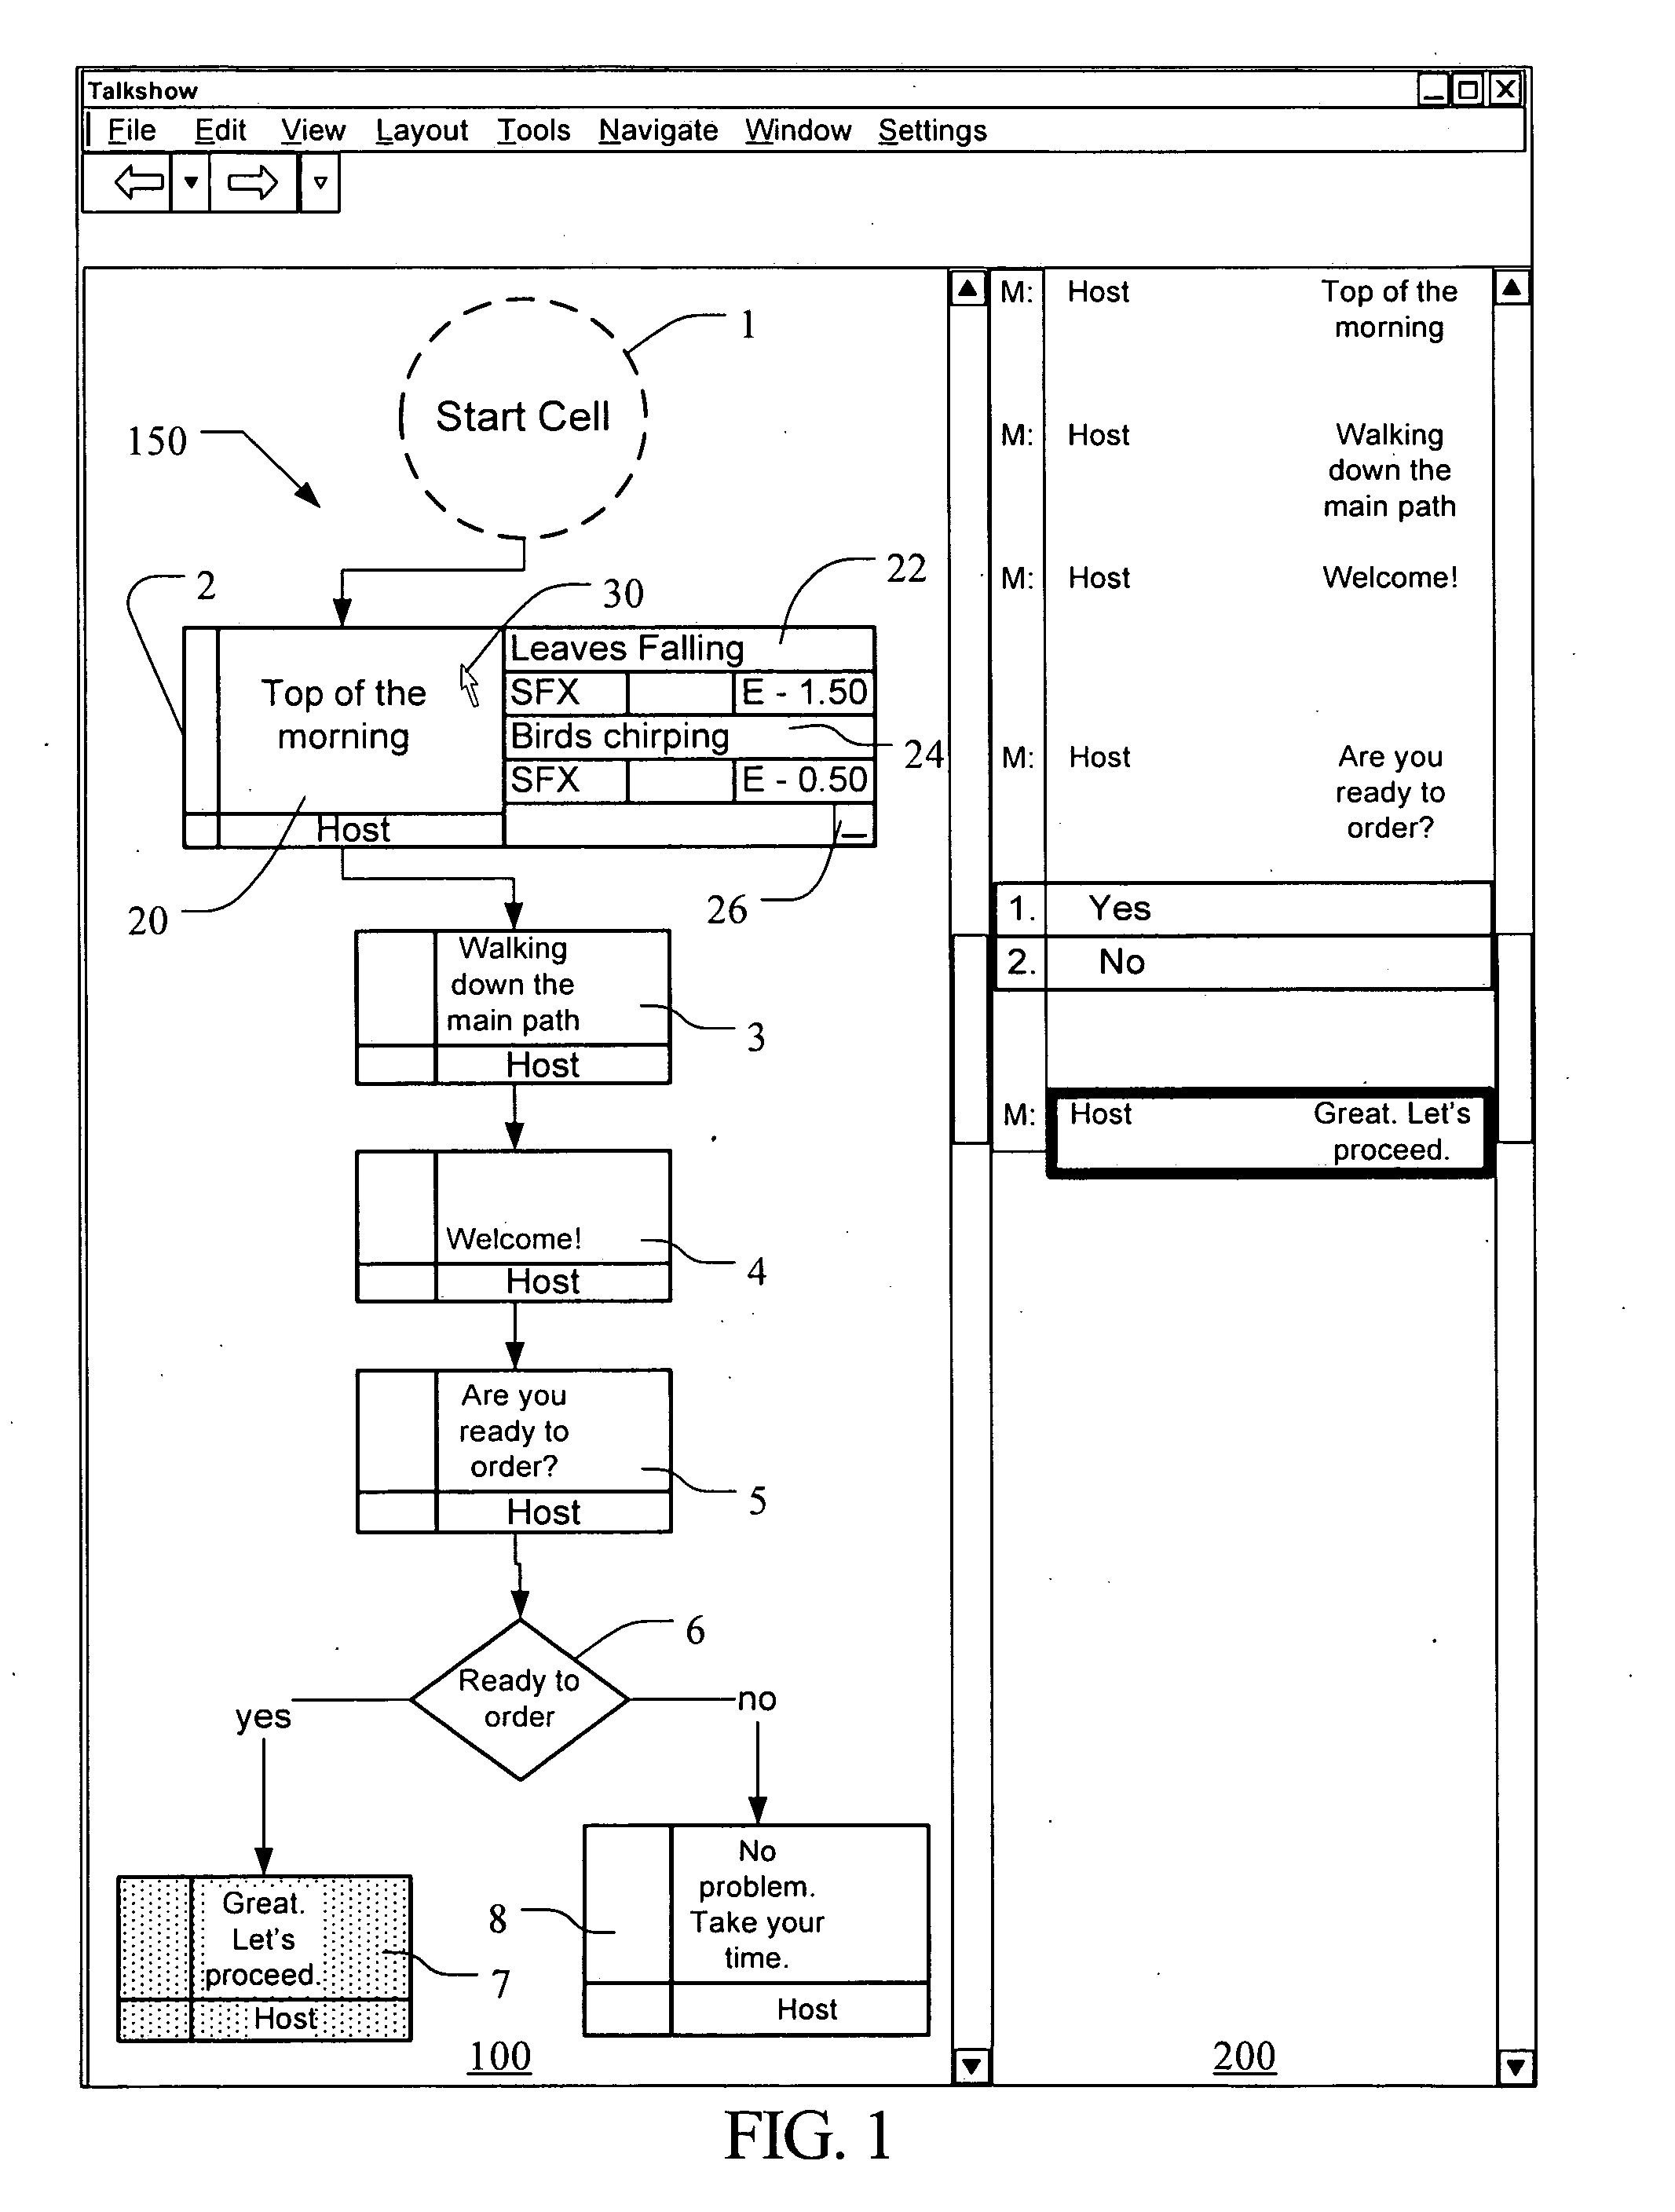 Methods for Identifying Actions in a Flowchart